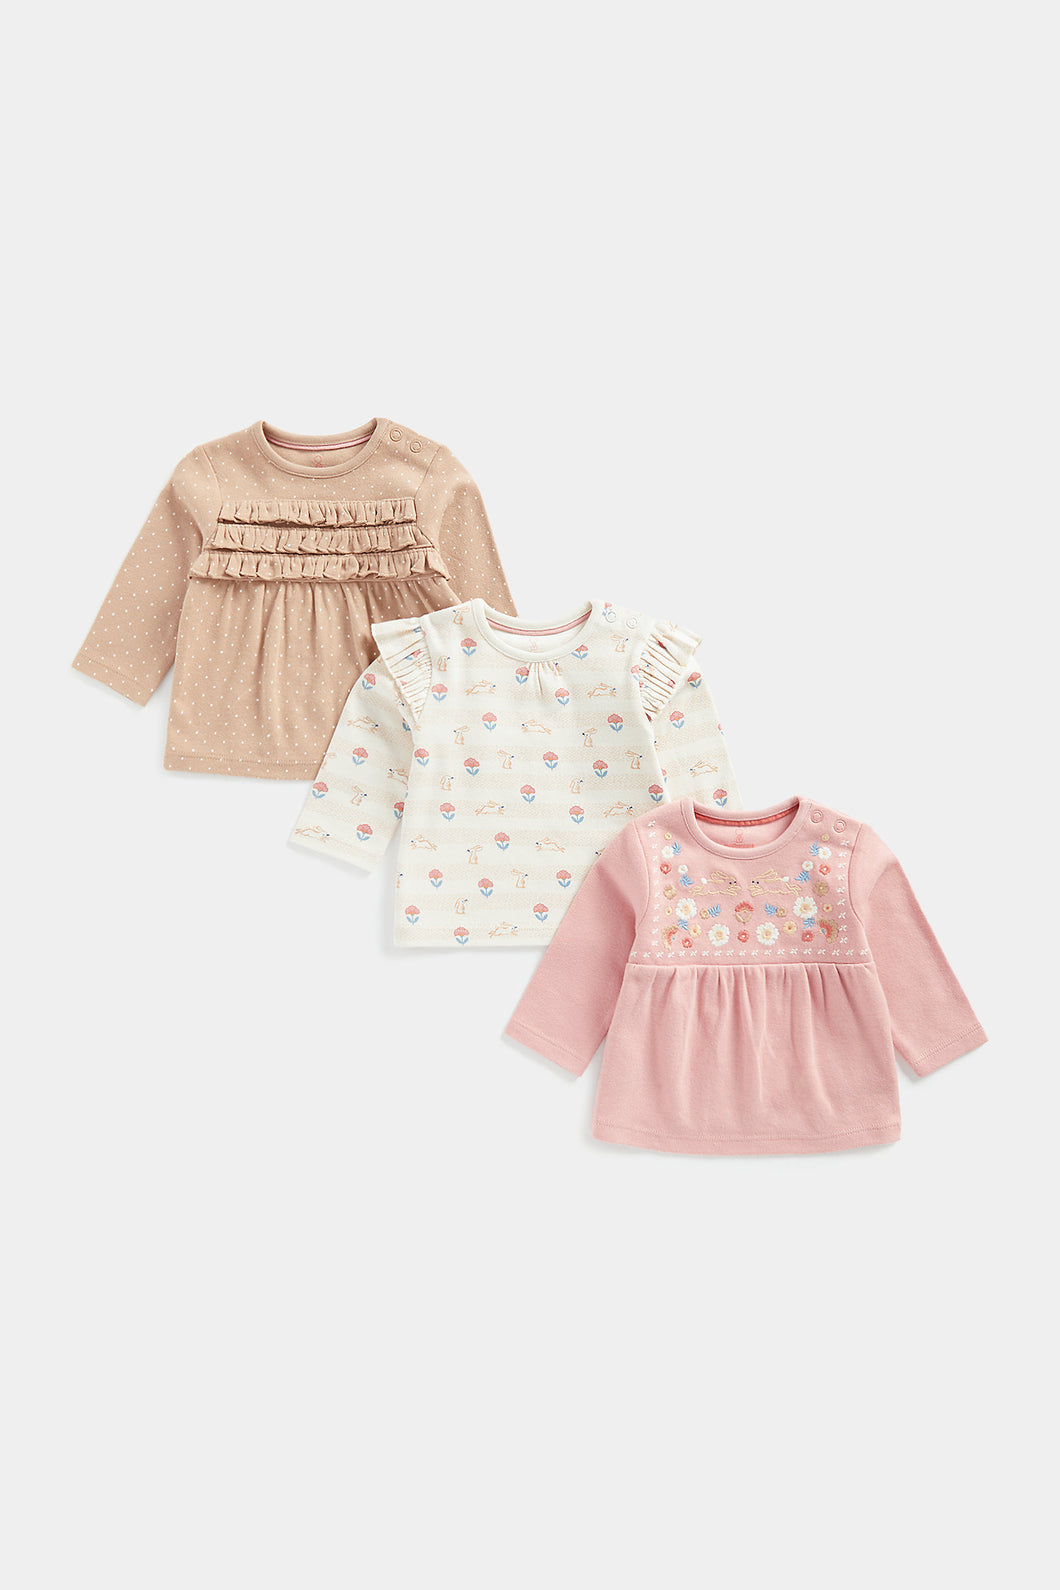 Mothercare Long-Sleeved T-Shirts - 3 Pack